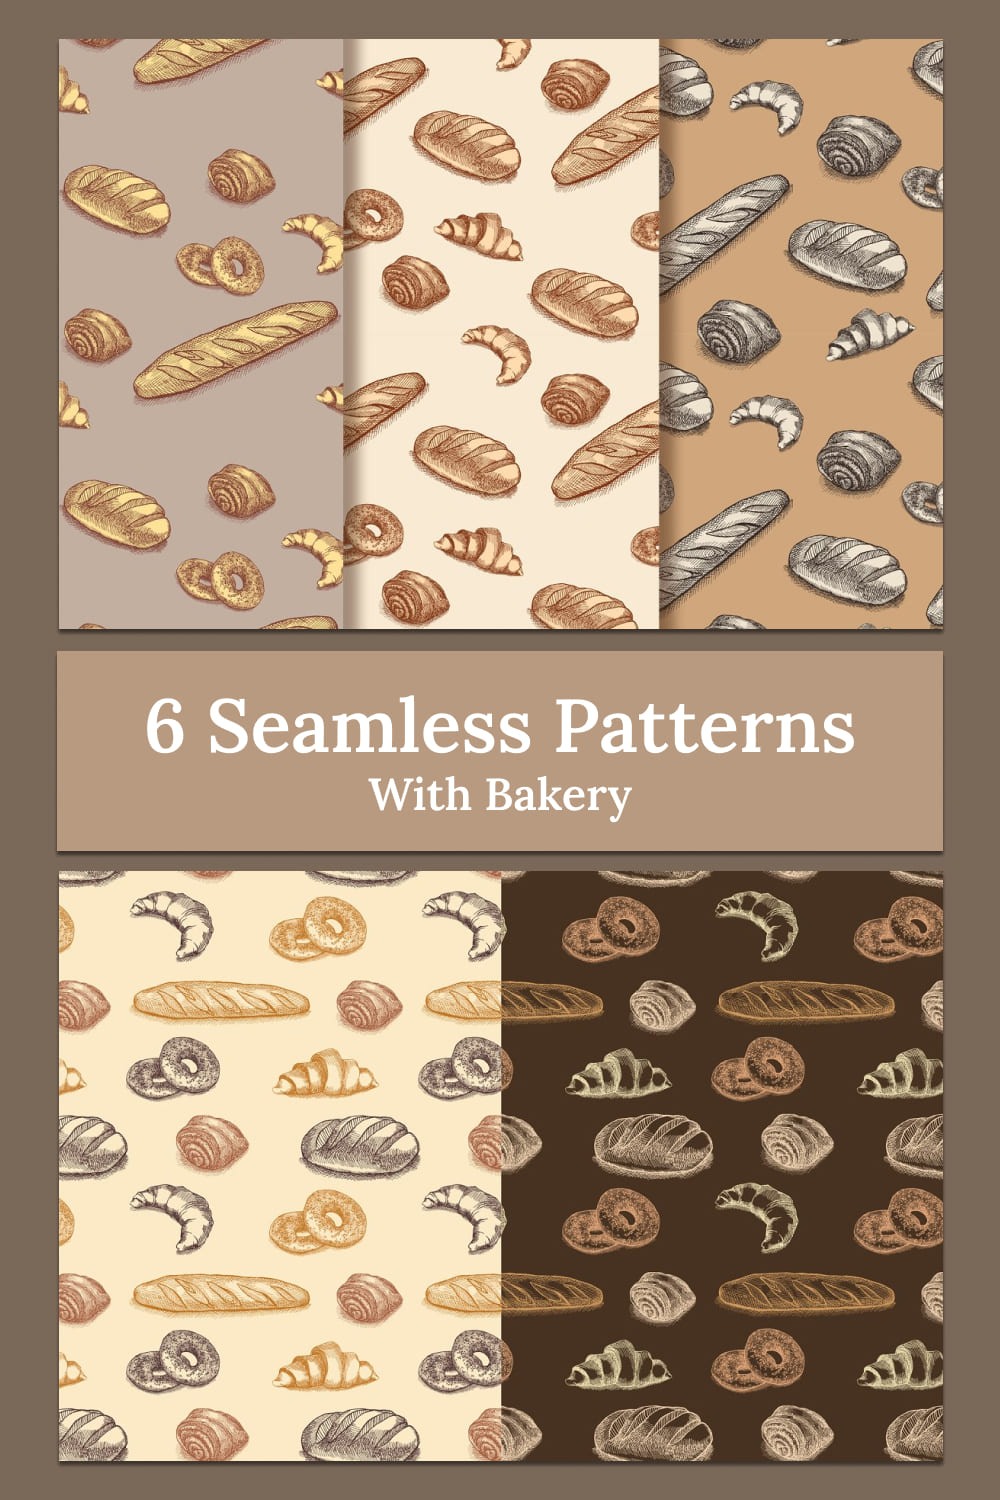 6 seamless patterns with bakery - pinterest image preview.